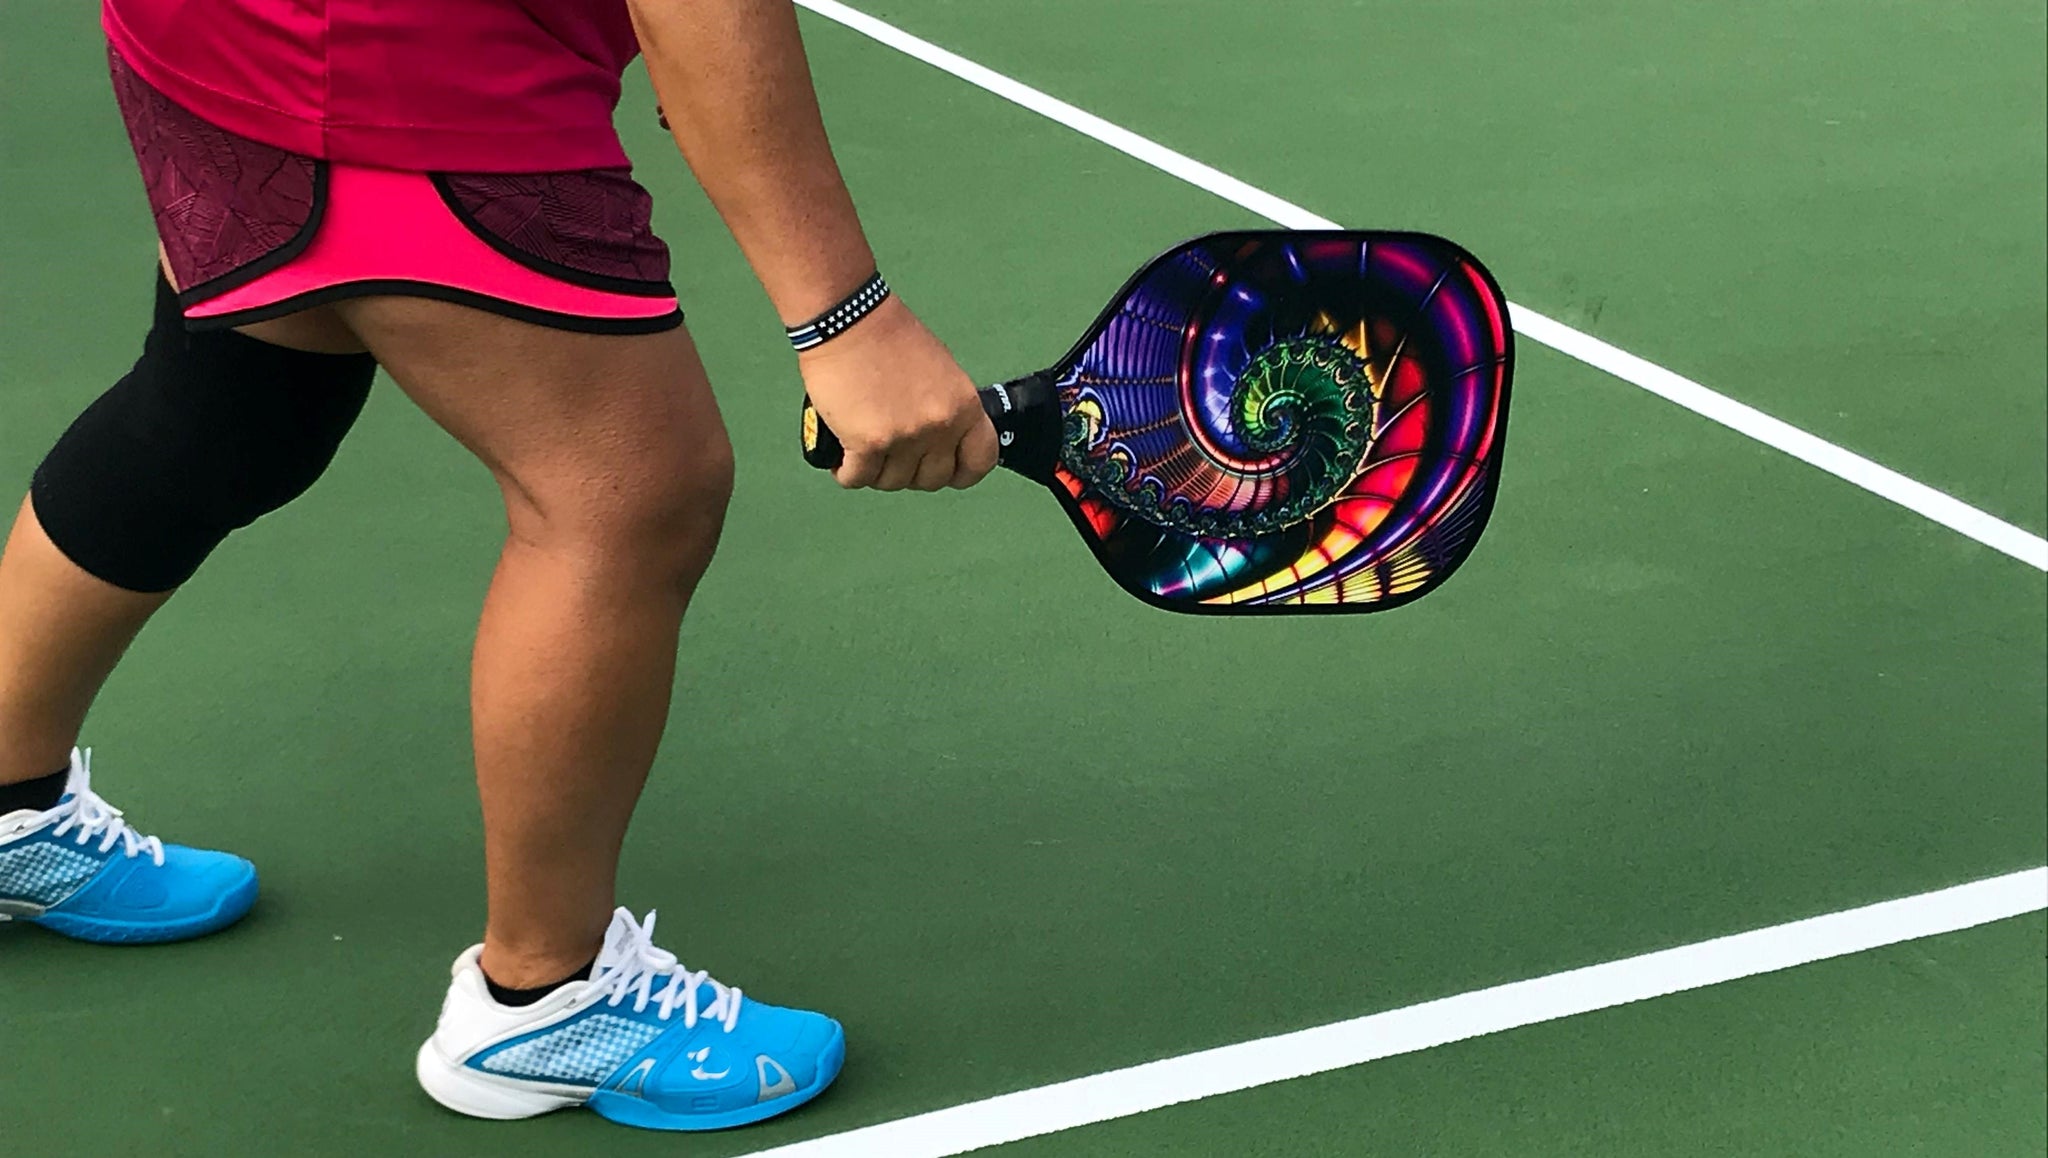 Pickleball racket: player with pickleball racket in hand